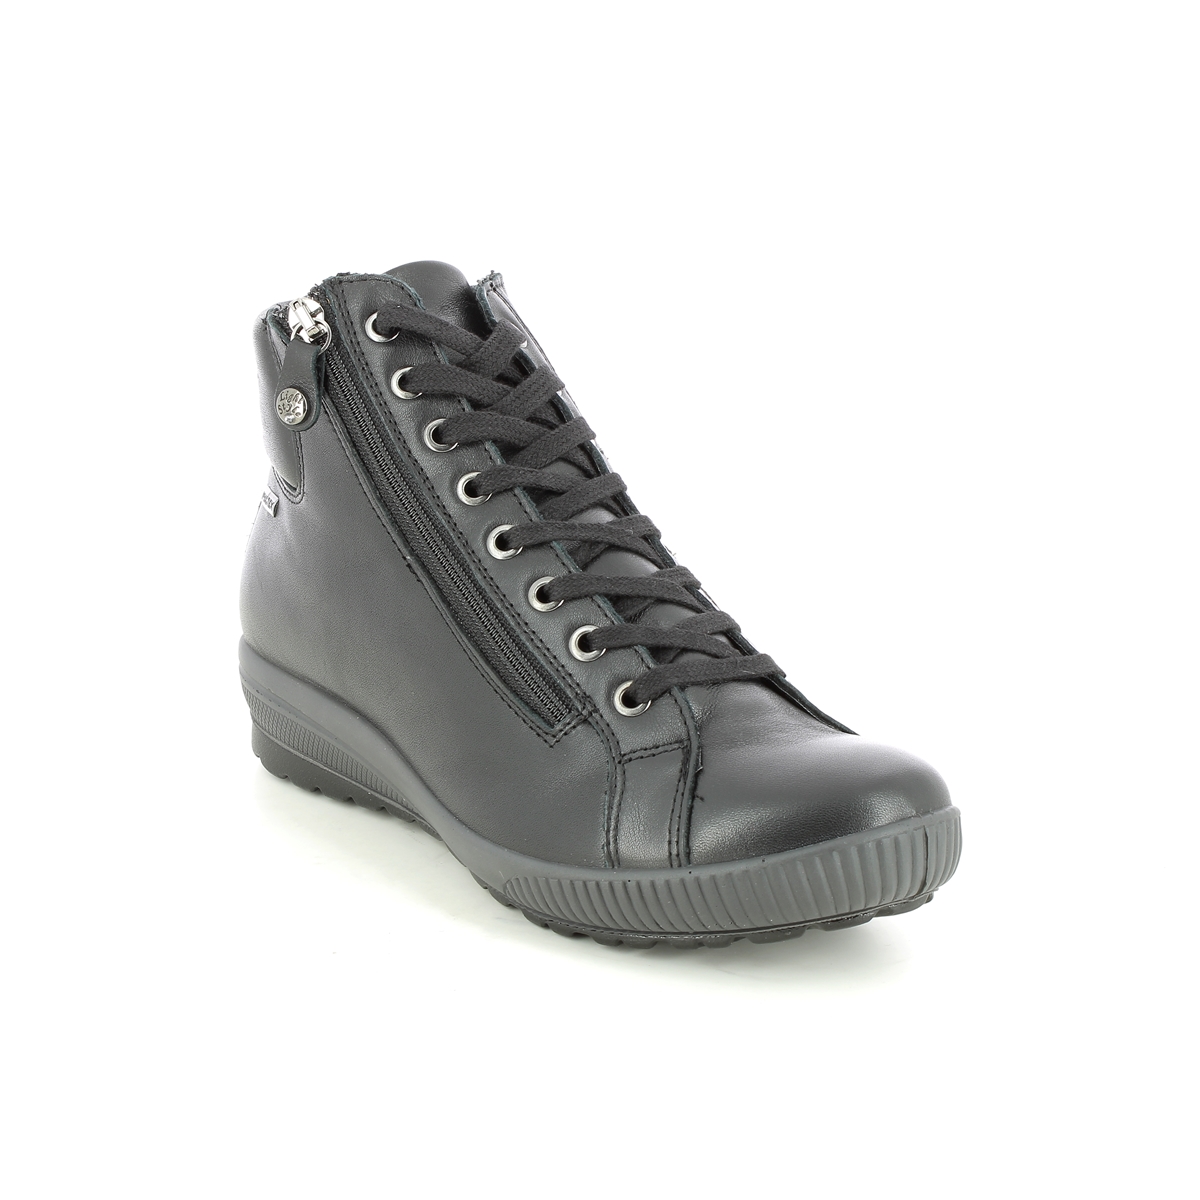 IMAC Fanabozi Tex Black leather Womens Hi Tops 7068-1400011 in a Plain Leather in Size 37